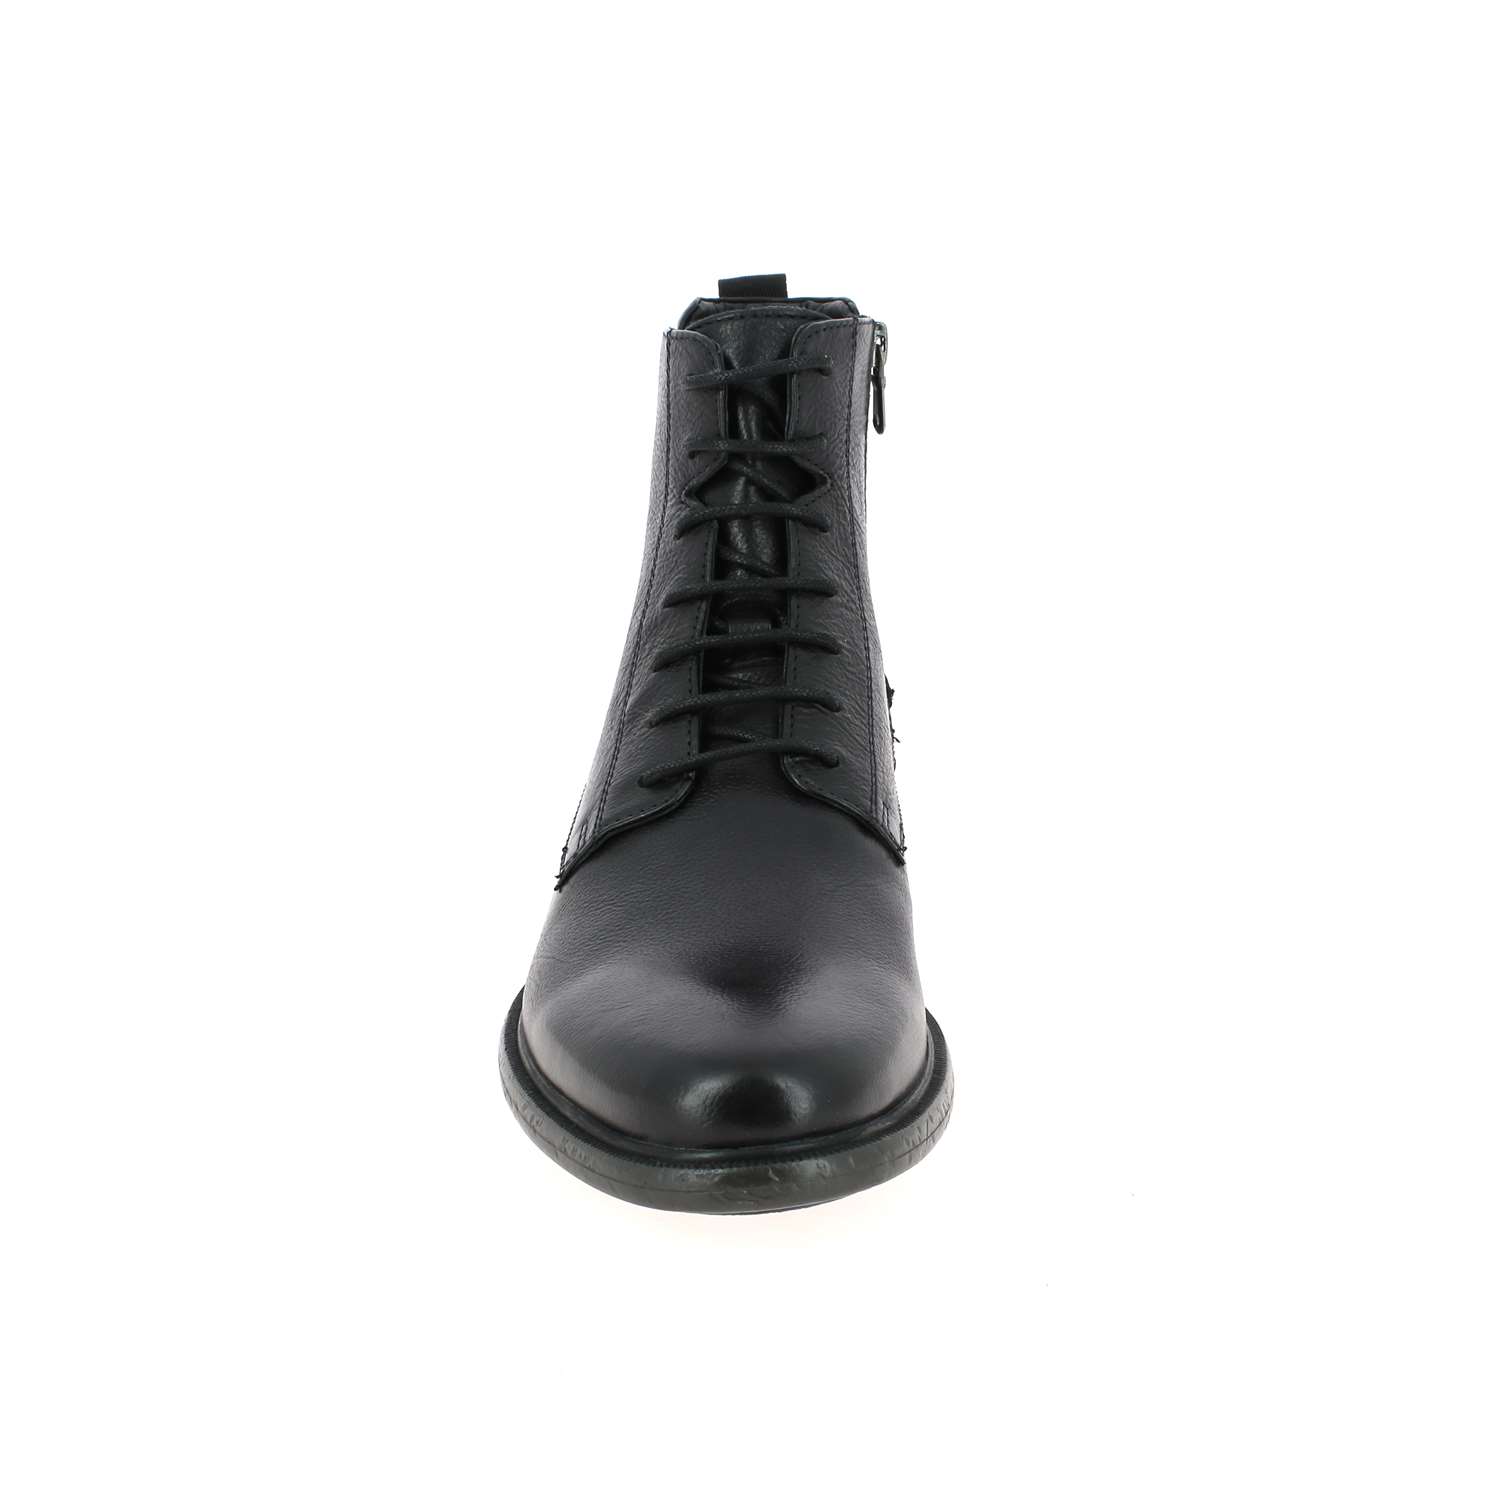 03 - TERENCE HI - GEOX - Boots et bottines - Cuir